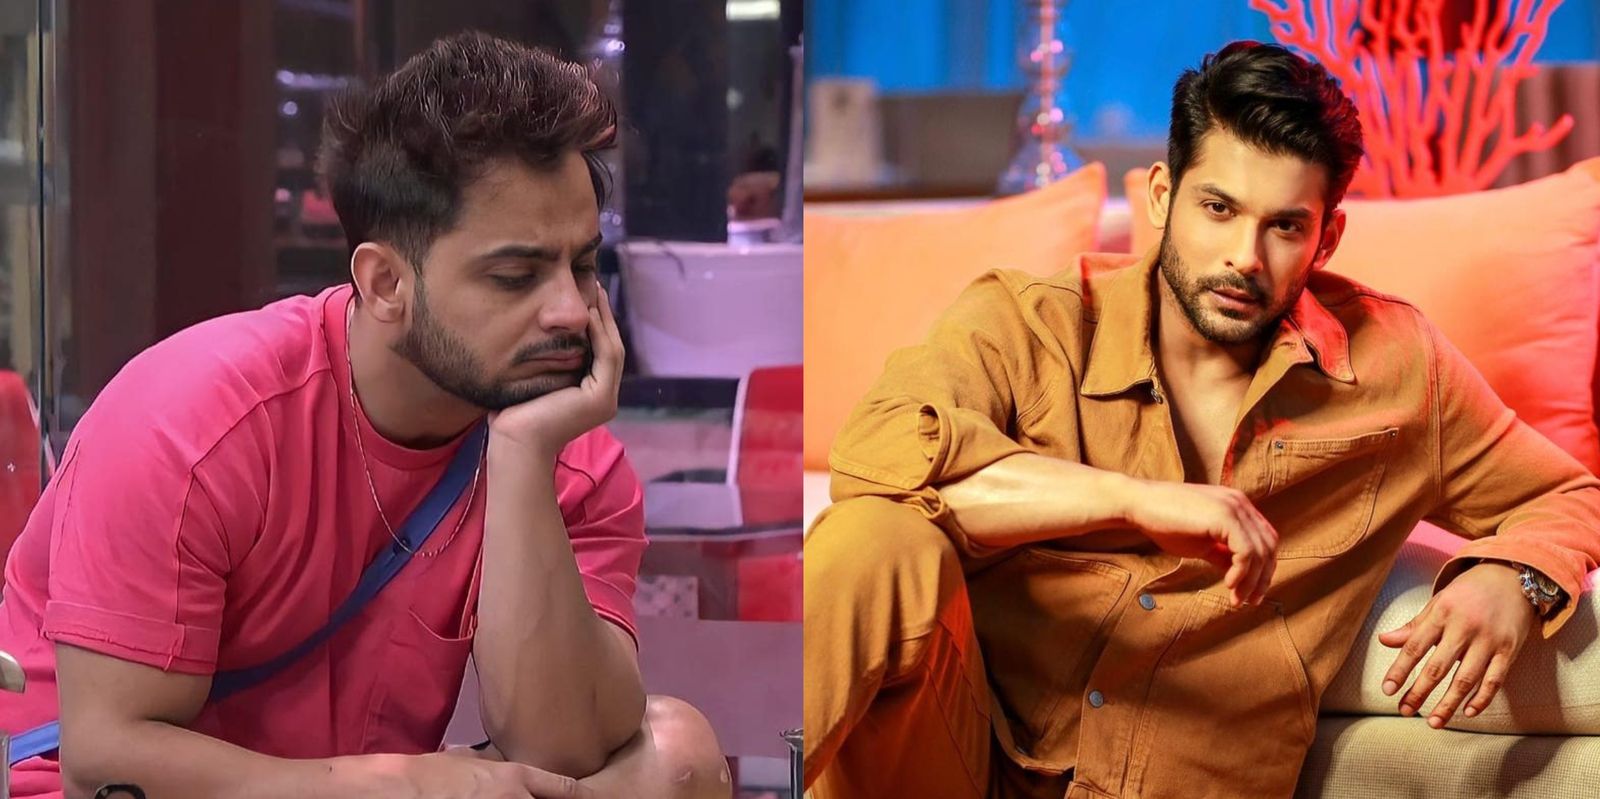 Bigg Boss OTT: Millind Gaba was disheartened to hear that Sidharth passed away with his head in Shehnaaz’s lap